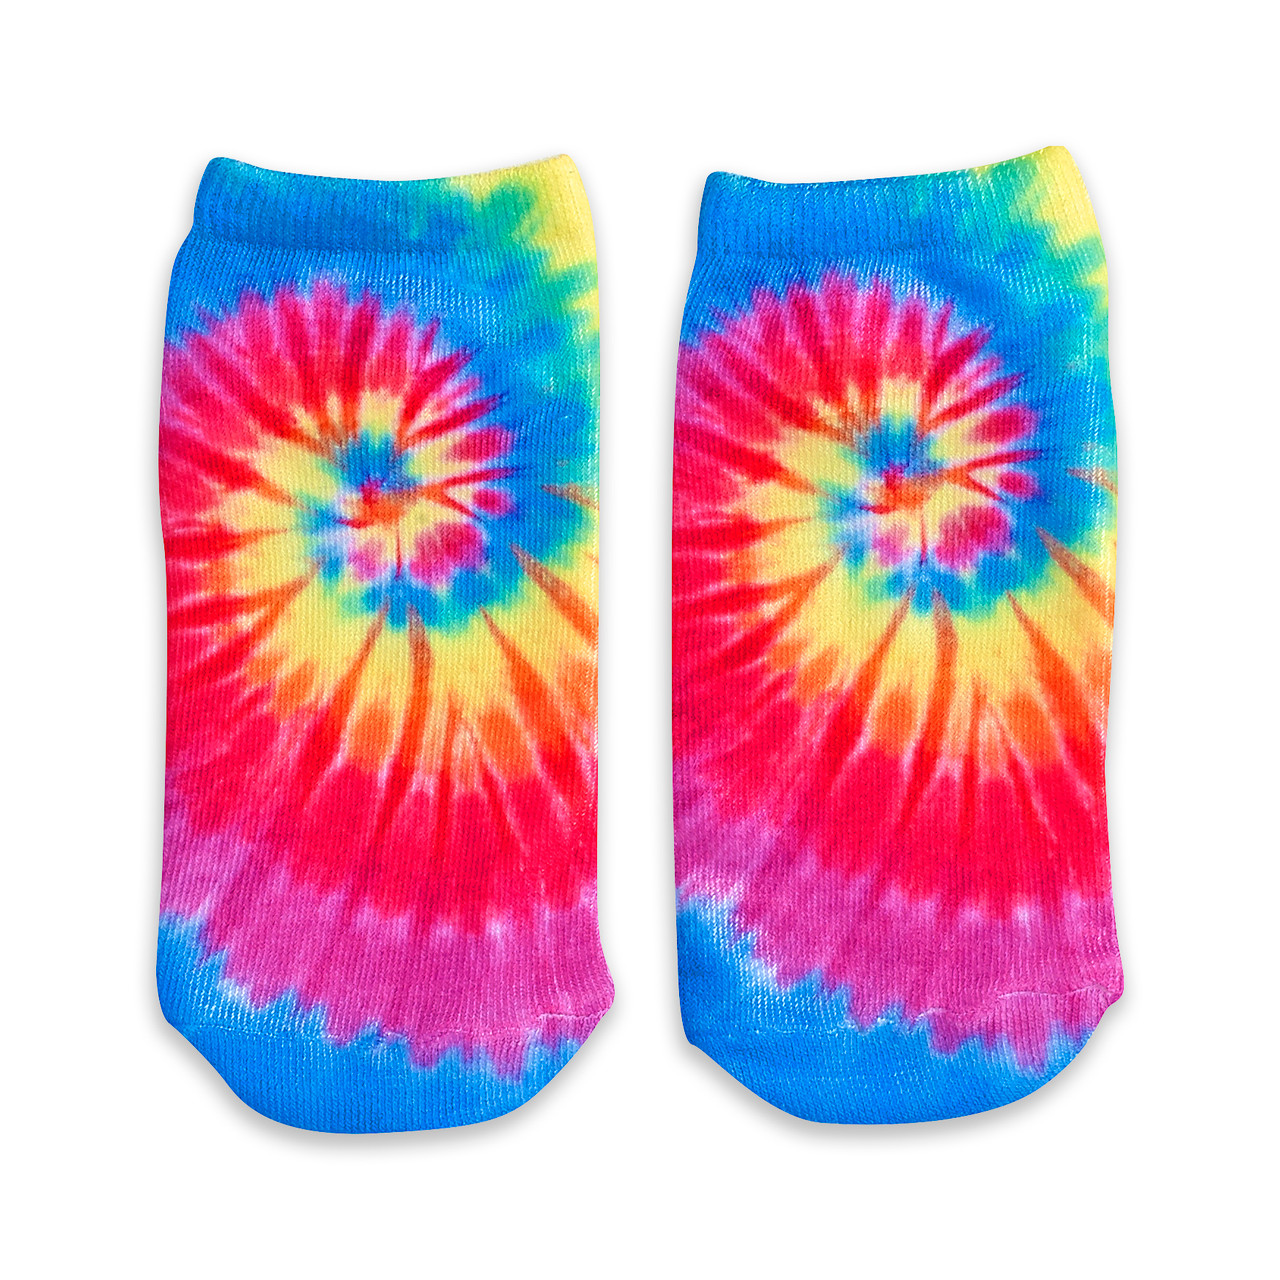 Tie Dye Ankle Socks- Bring some color to your feet